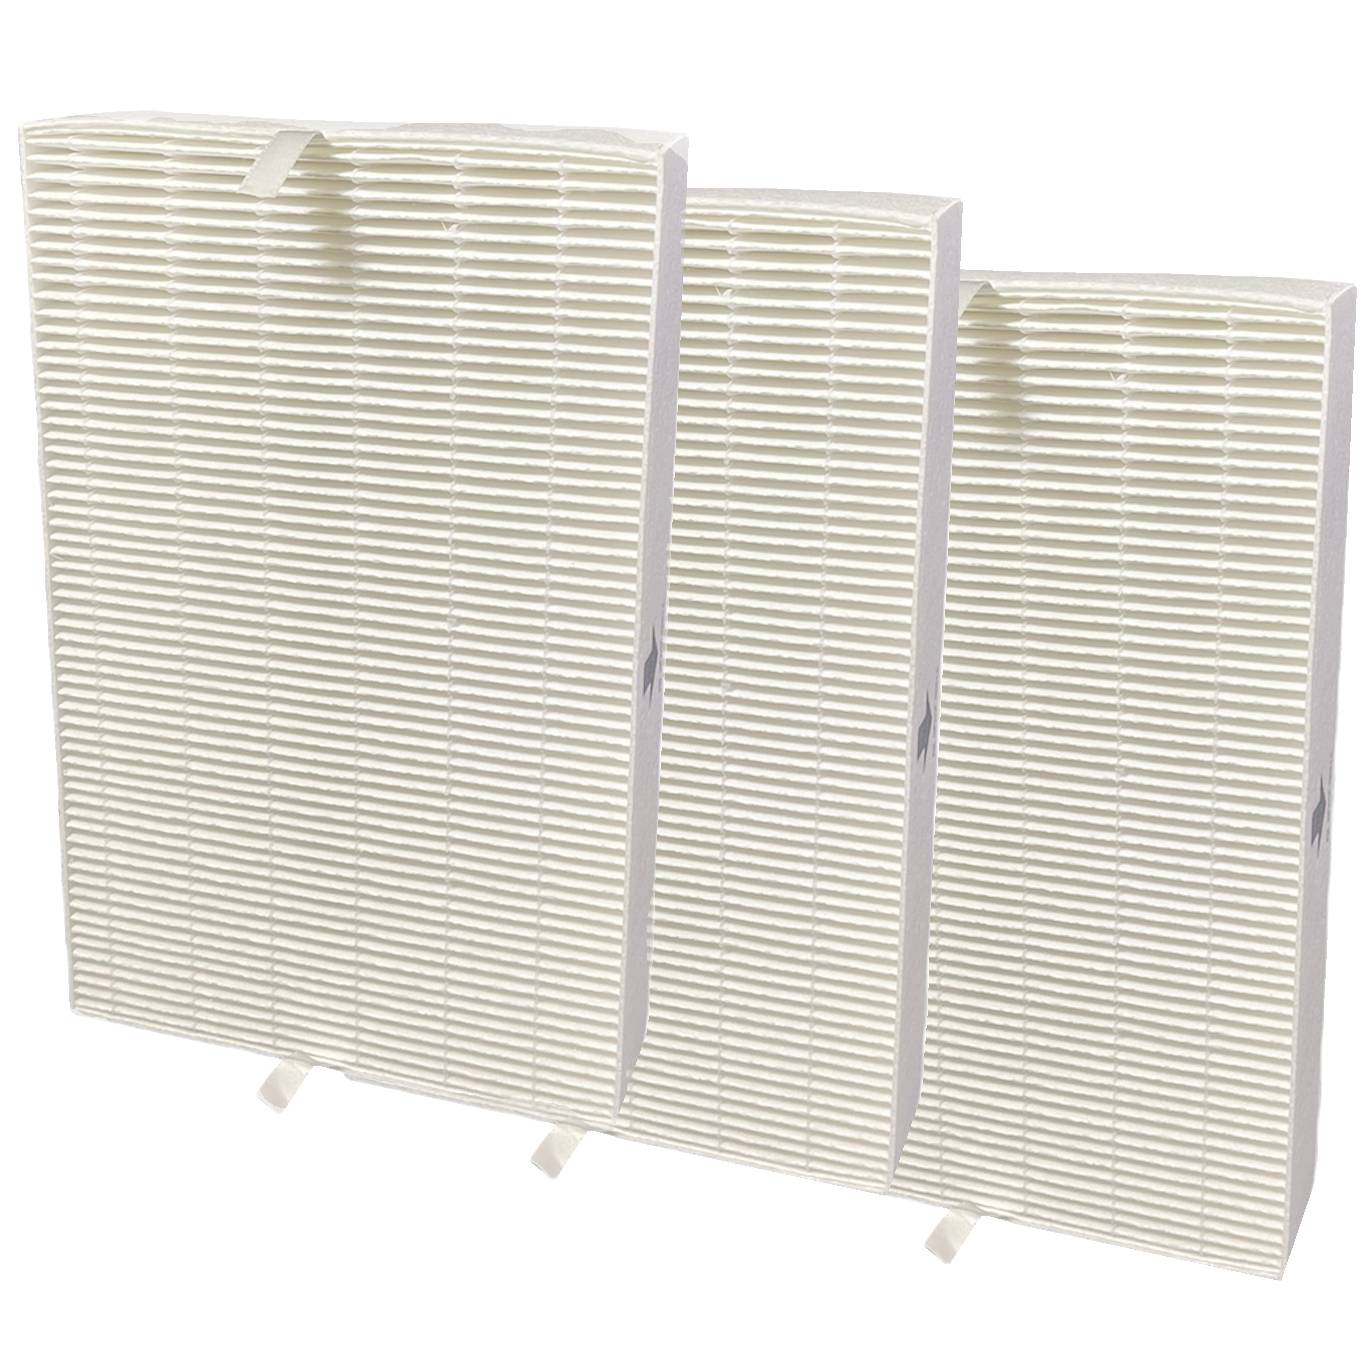 Filters Fast&reg; Replacement for Honeywell HRF-R3 - 3-Pack